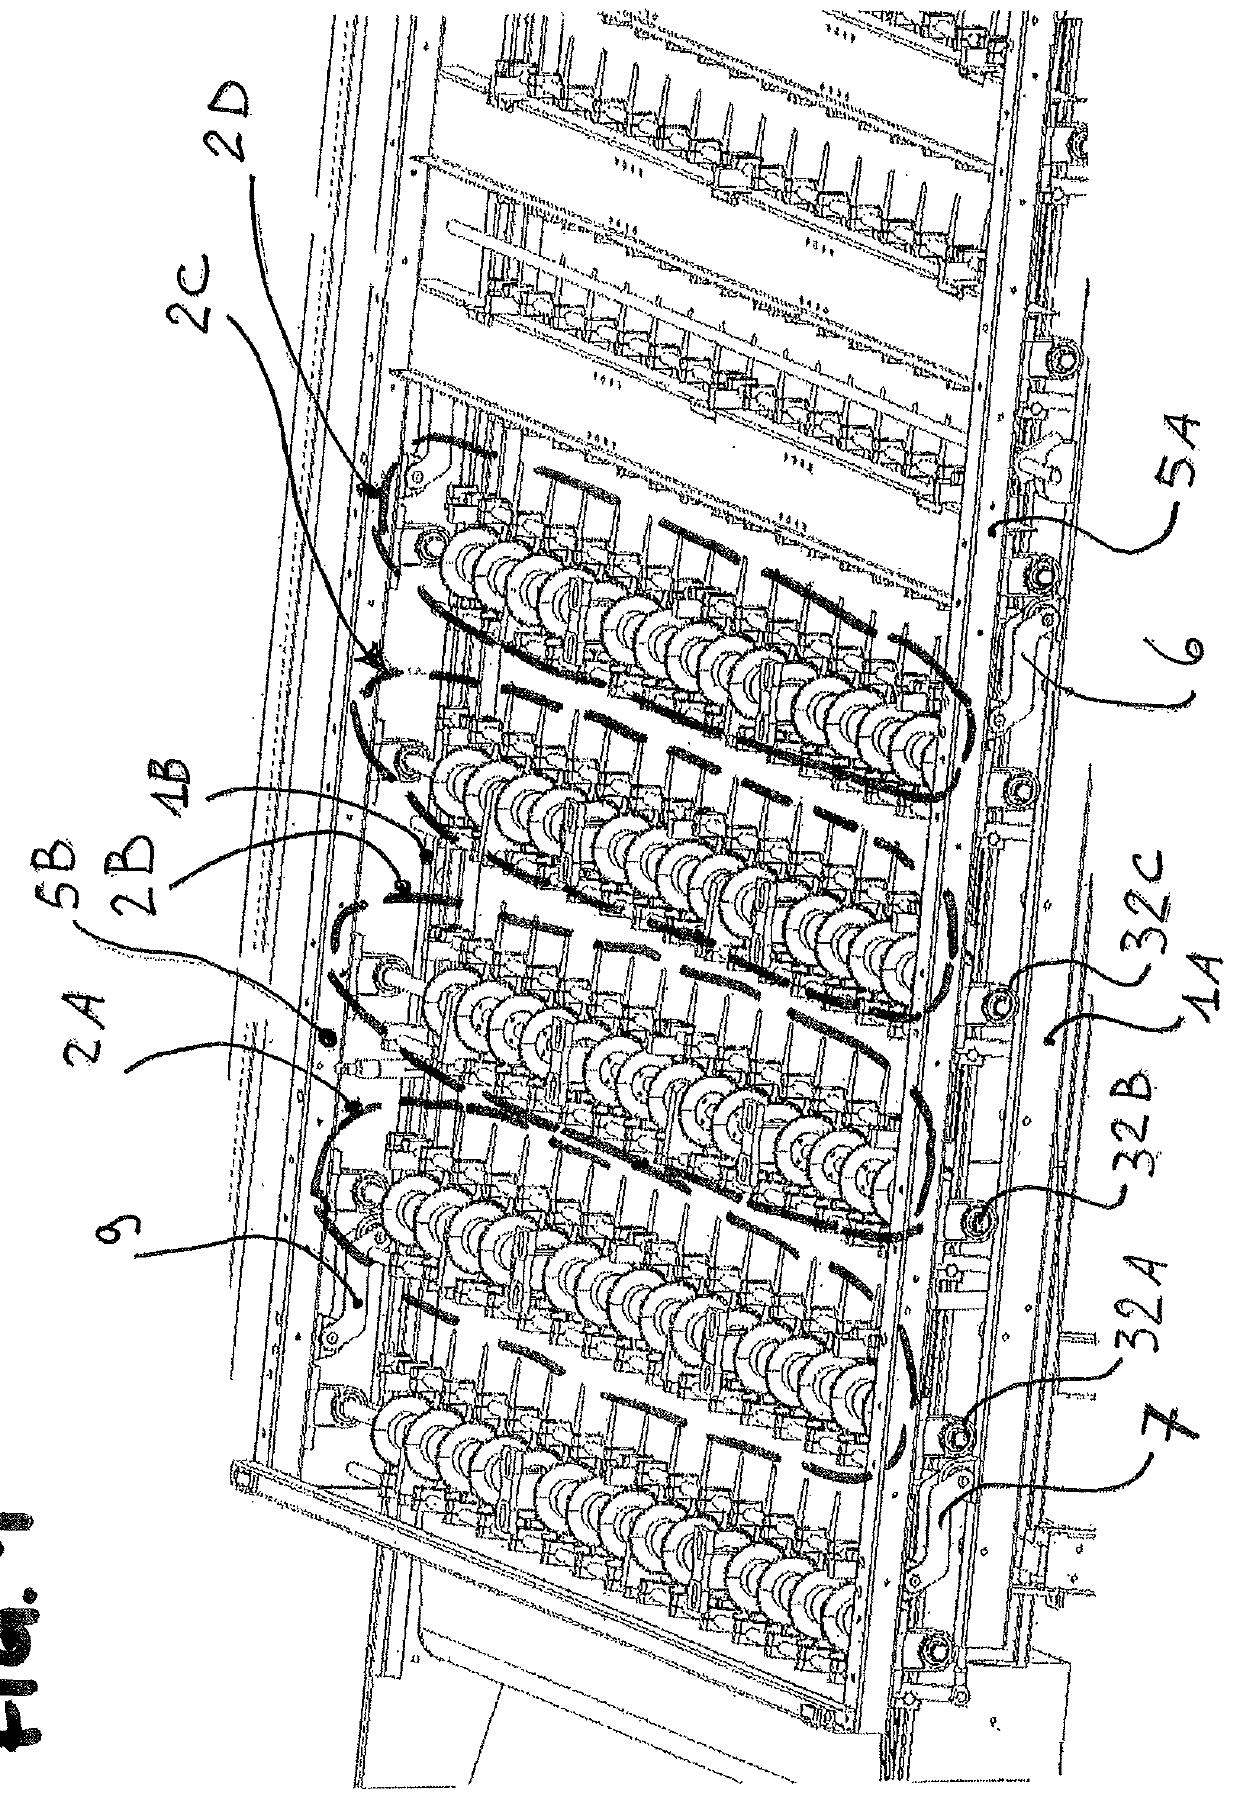 Apparatus for separating agricultural products